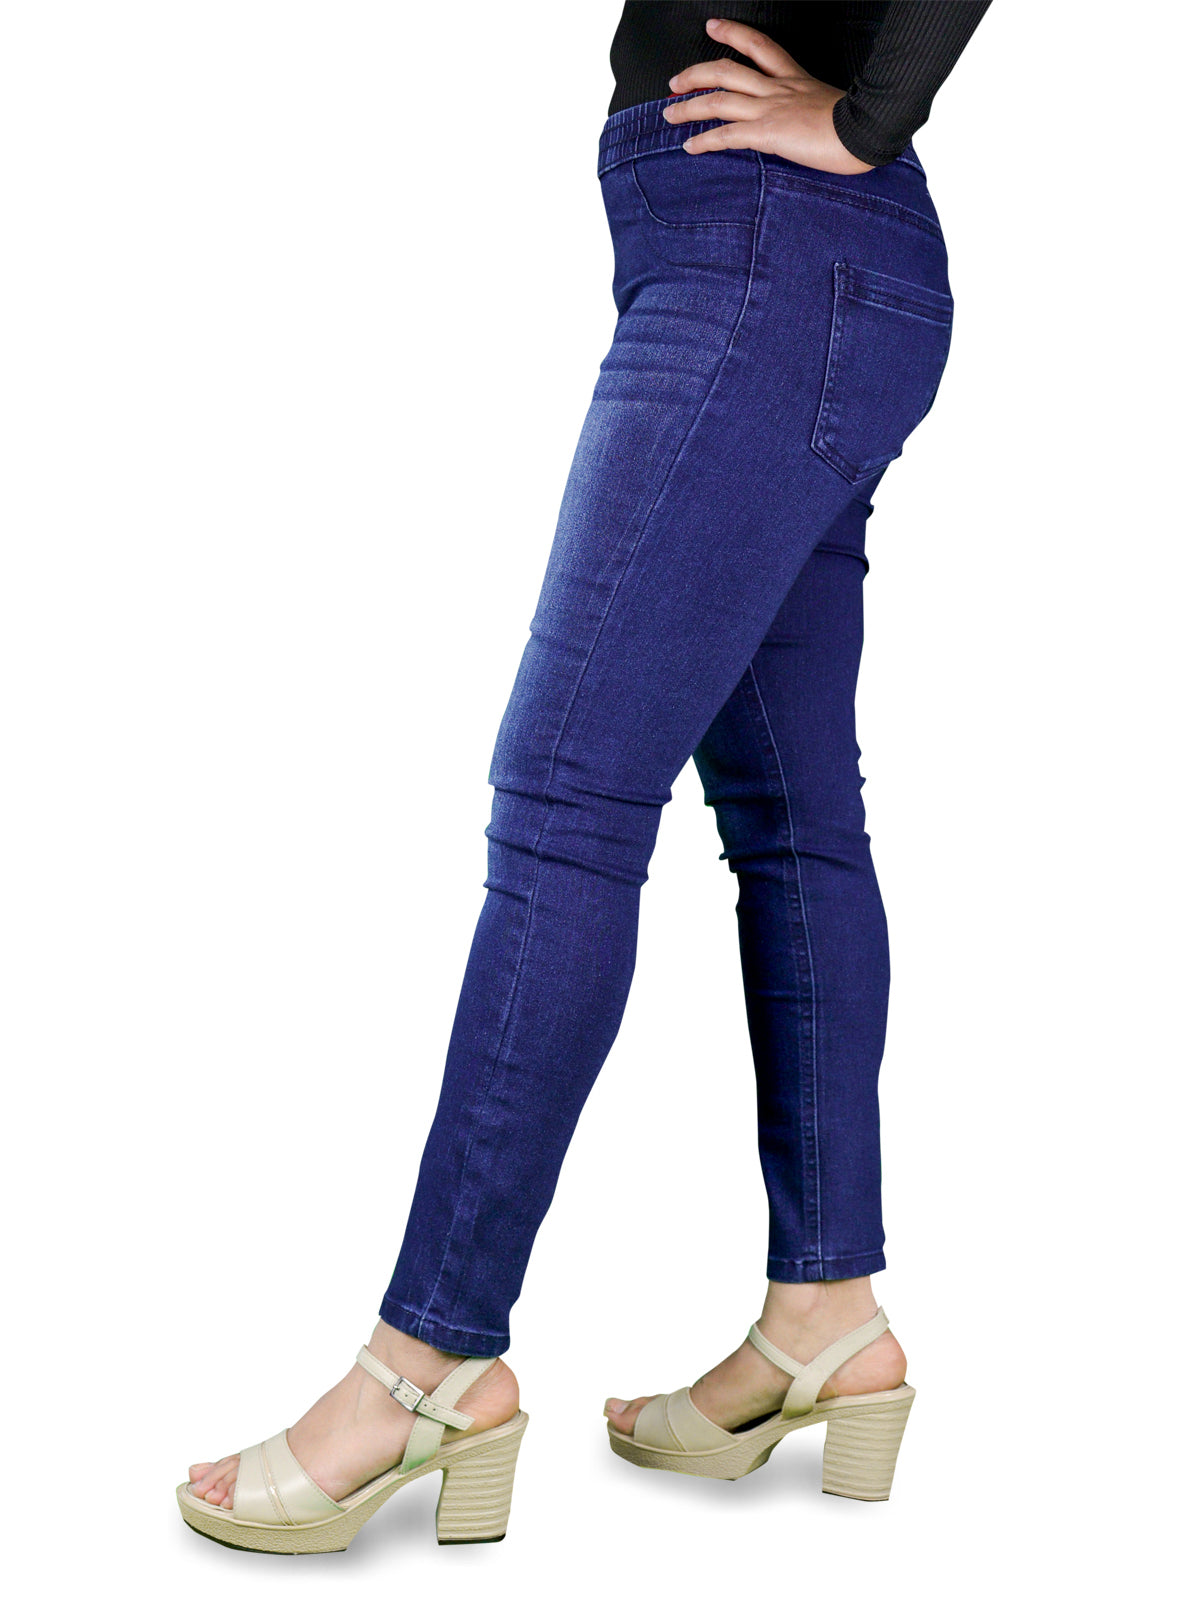 Ladies Jeggings Skinny Fit Coloured Stretchy Jeans